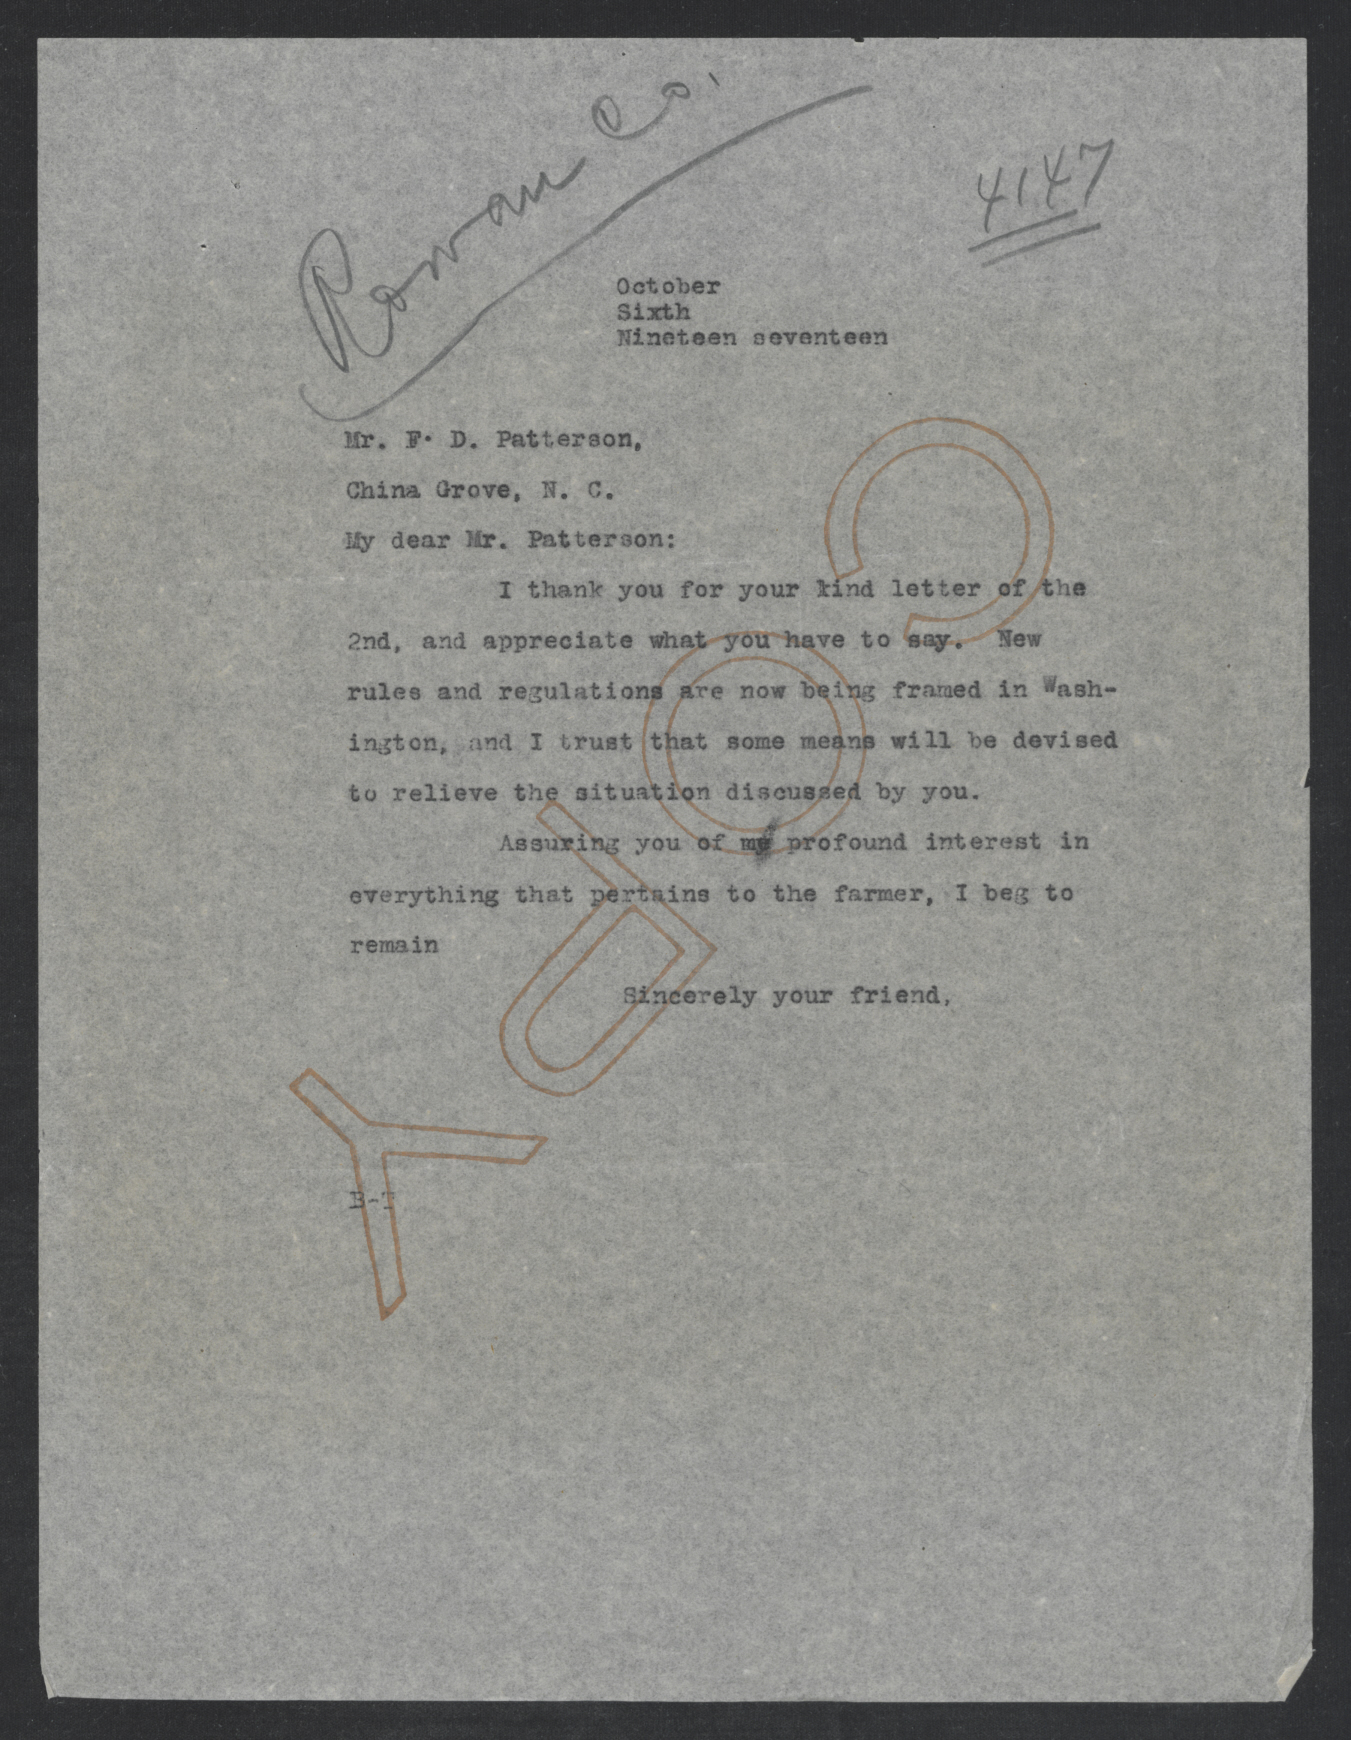 Letter from Thomas W. Bickett to Franklin D. Patterson, October 6, 1917